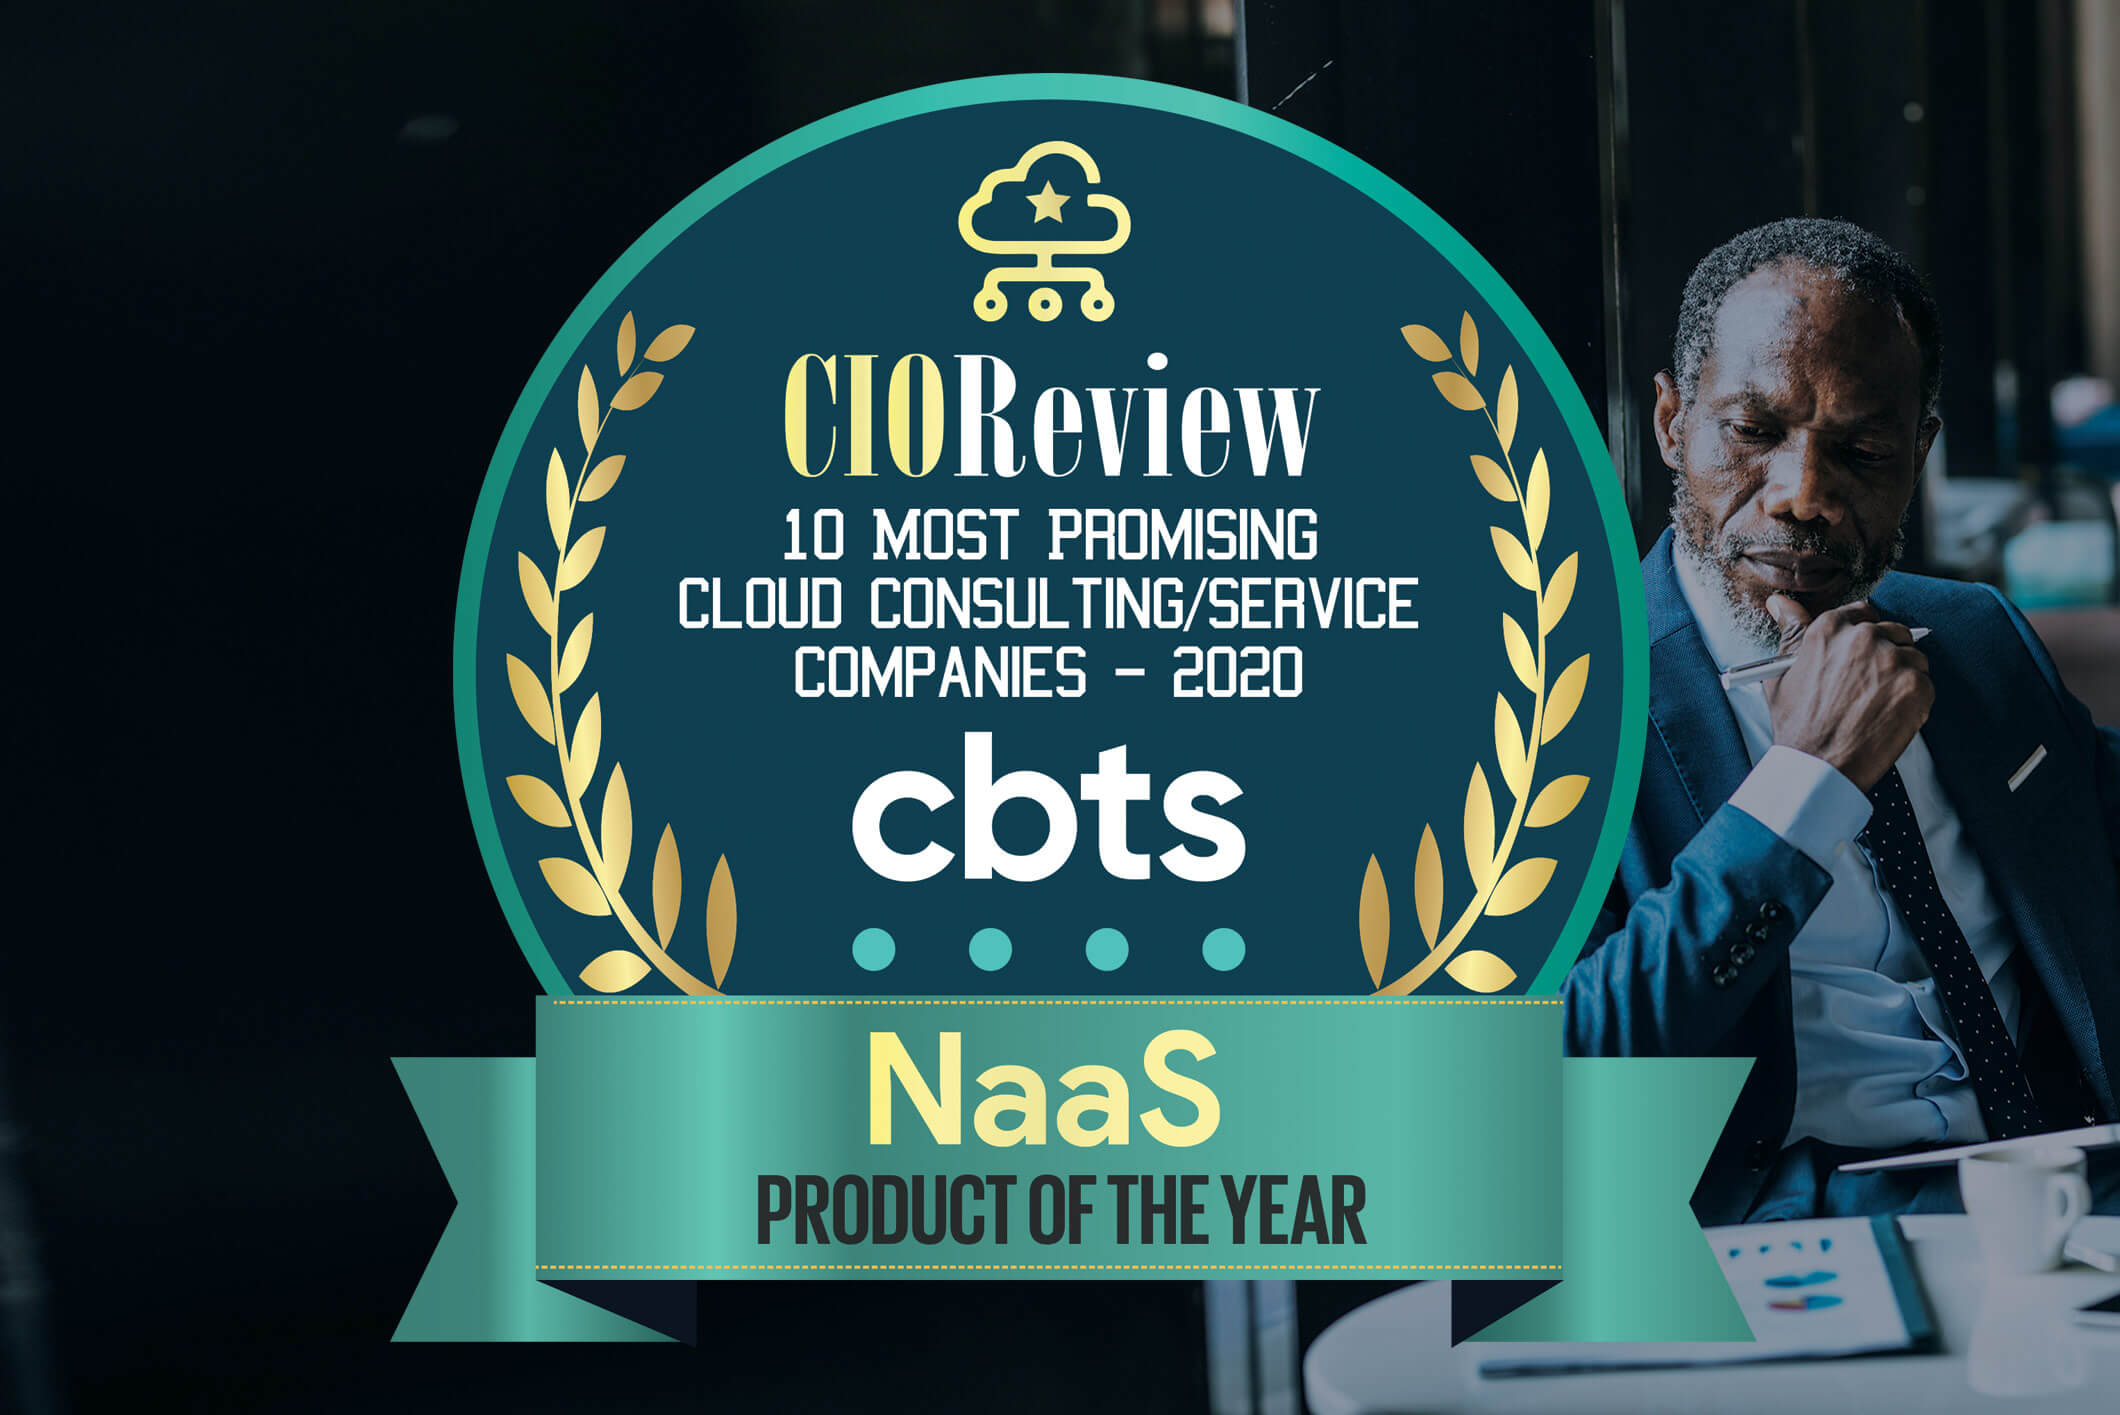 CBTS NaaS Awarded Product of the Year by CIOReview